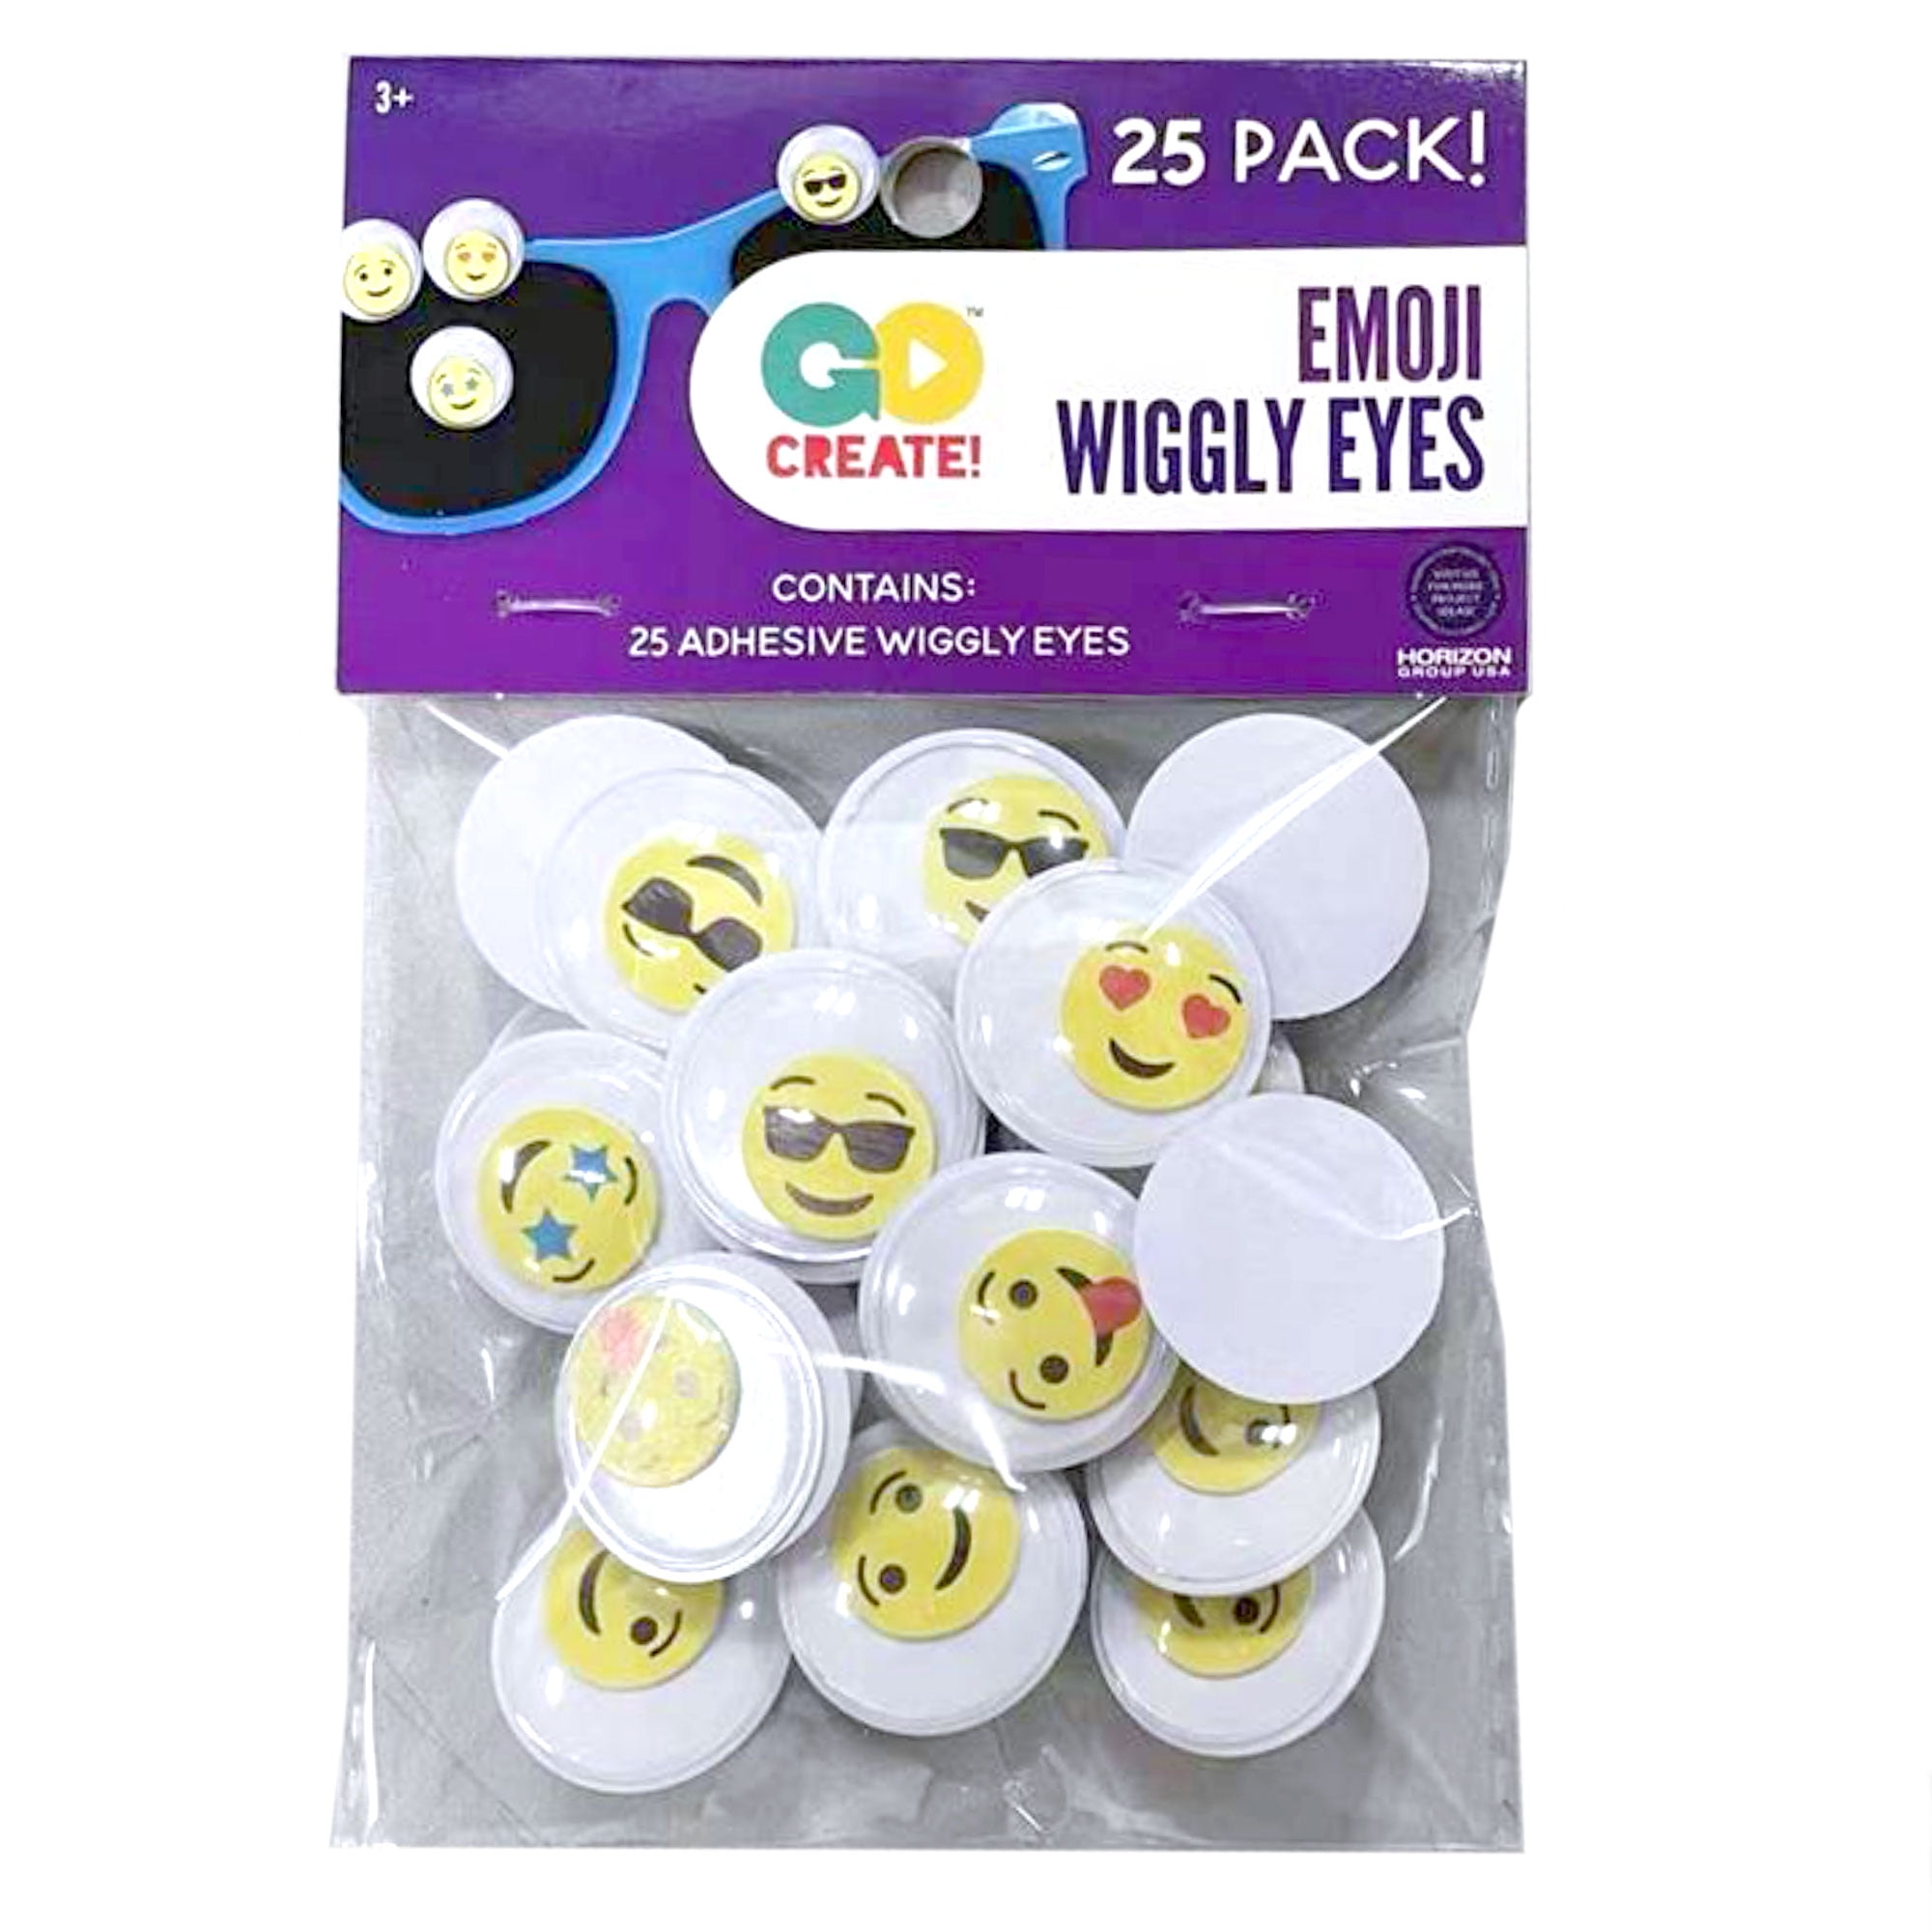 20PR. 15MM ROUND 1/2" ACROSS DARICE WIGGLE EYES FOR CRAFTS- 